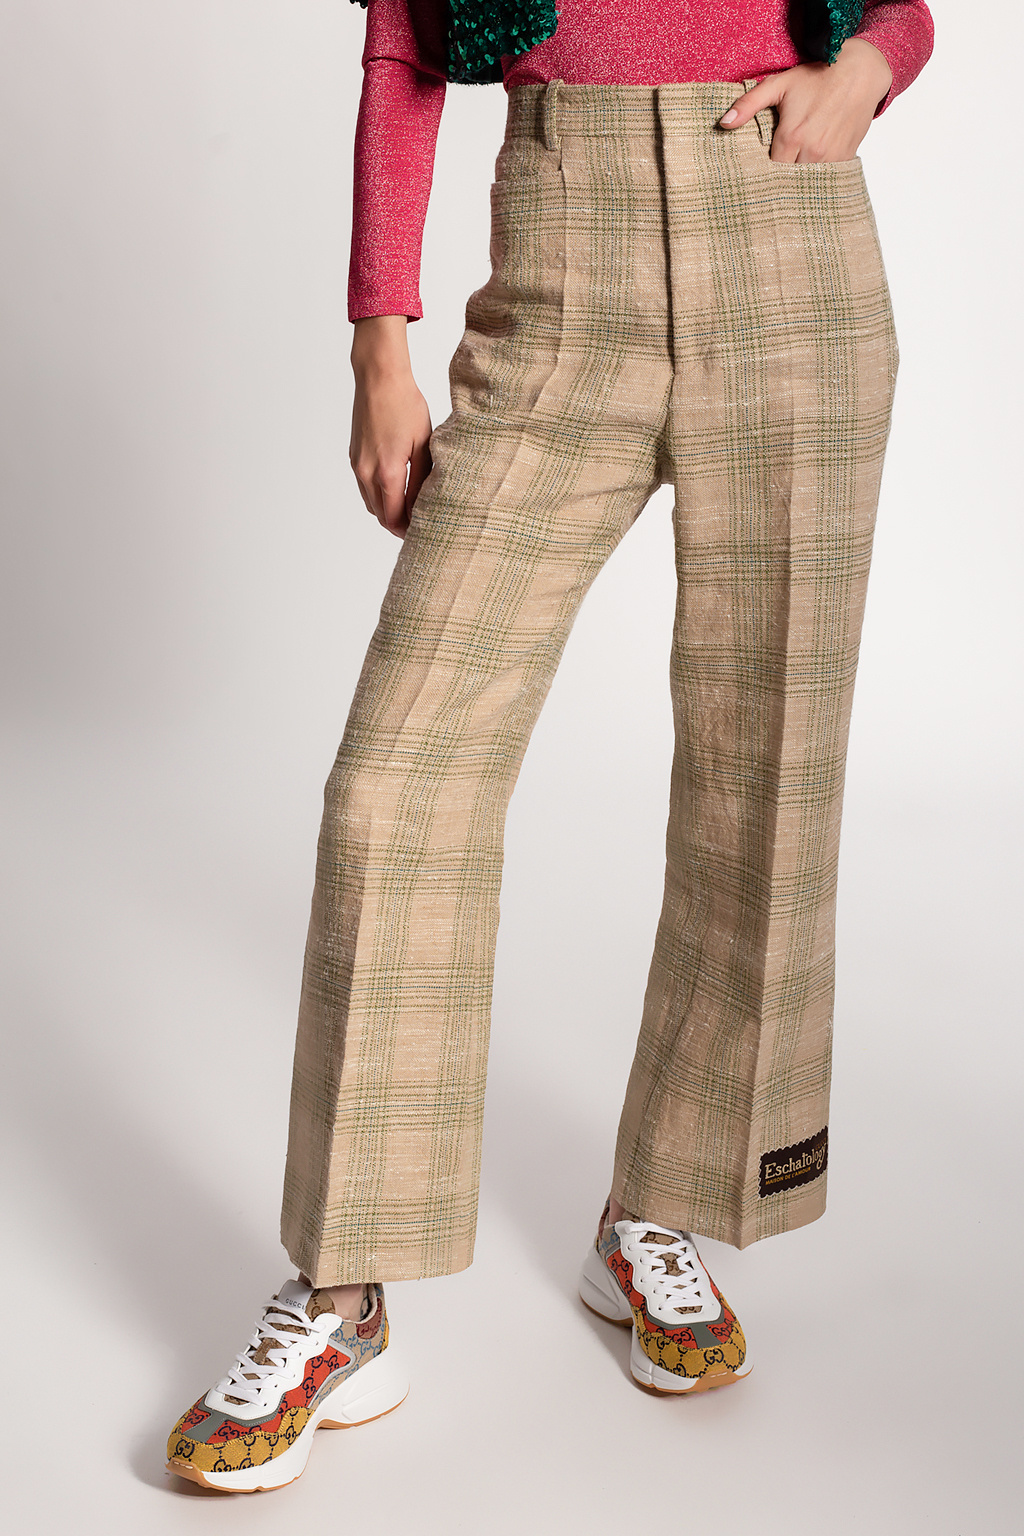 Gucci Pleat-front trousers | Women's Clothing | Vitkac